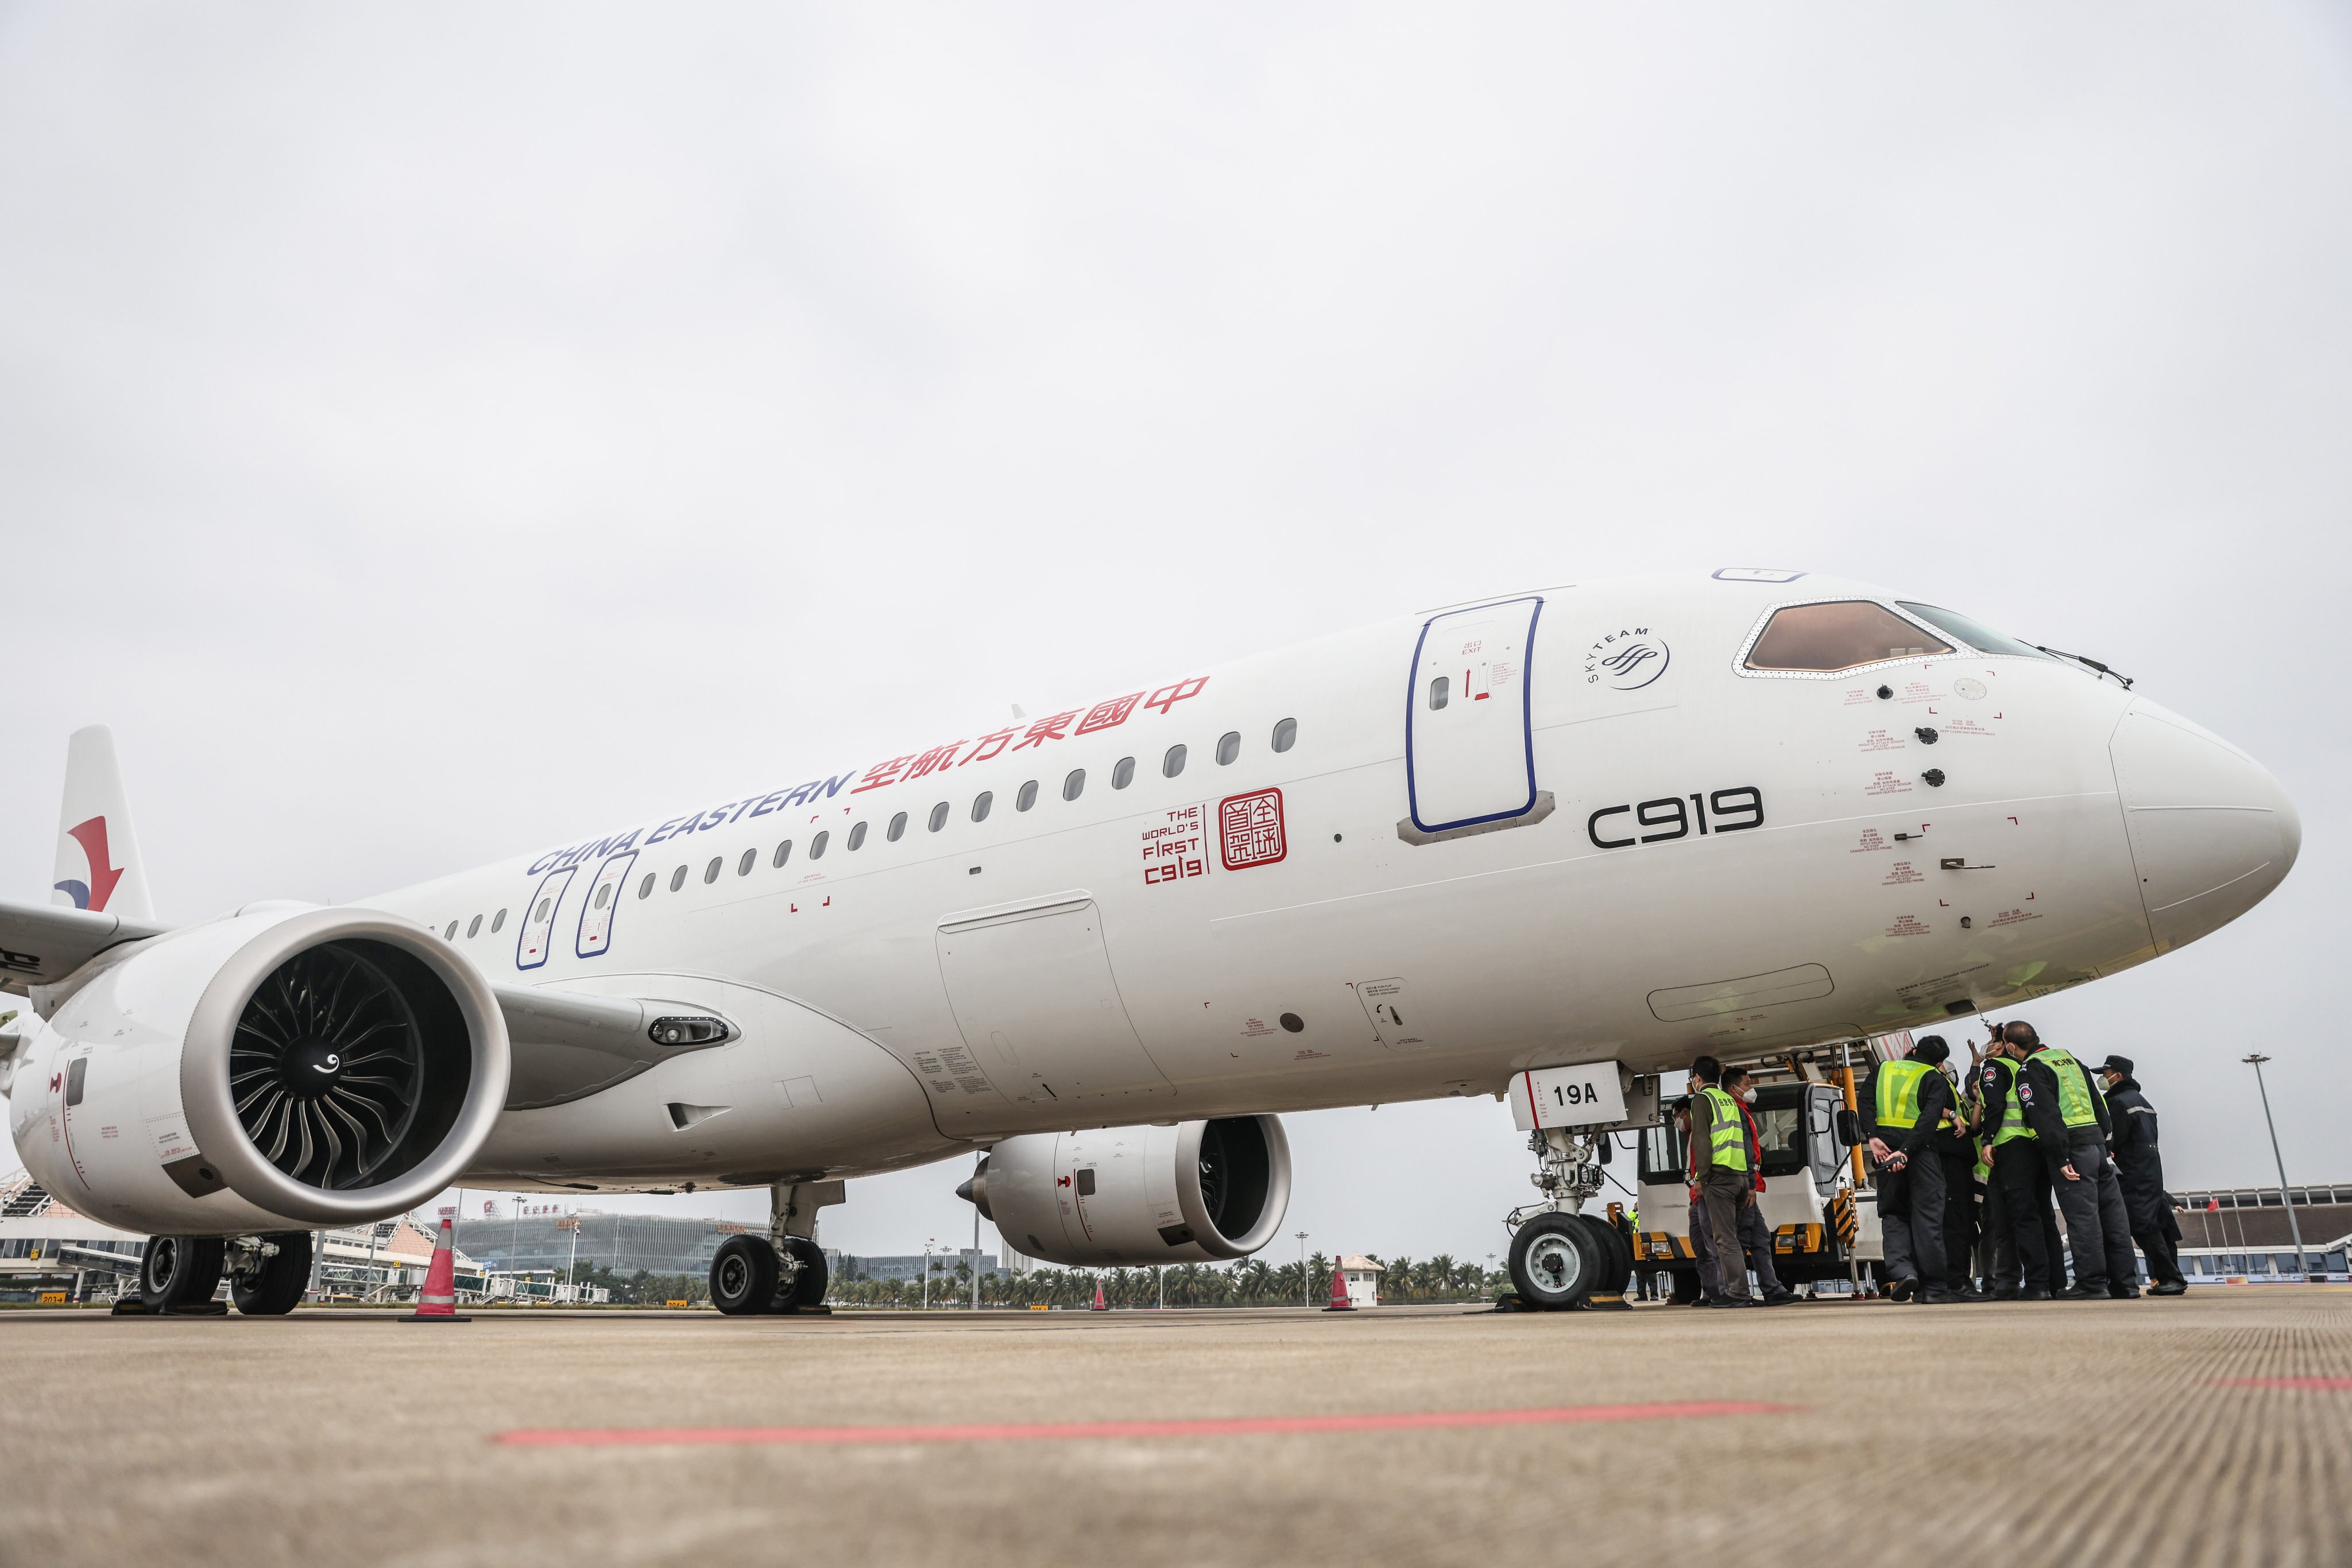 Several countries have said they will monitor the waste water from flights originating from China in response to an explosion of Covid-19 cases across the nation. Photo: Xinhua/File